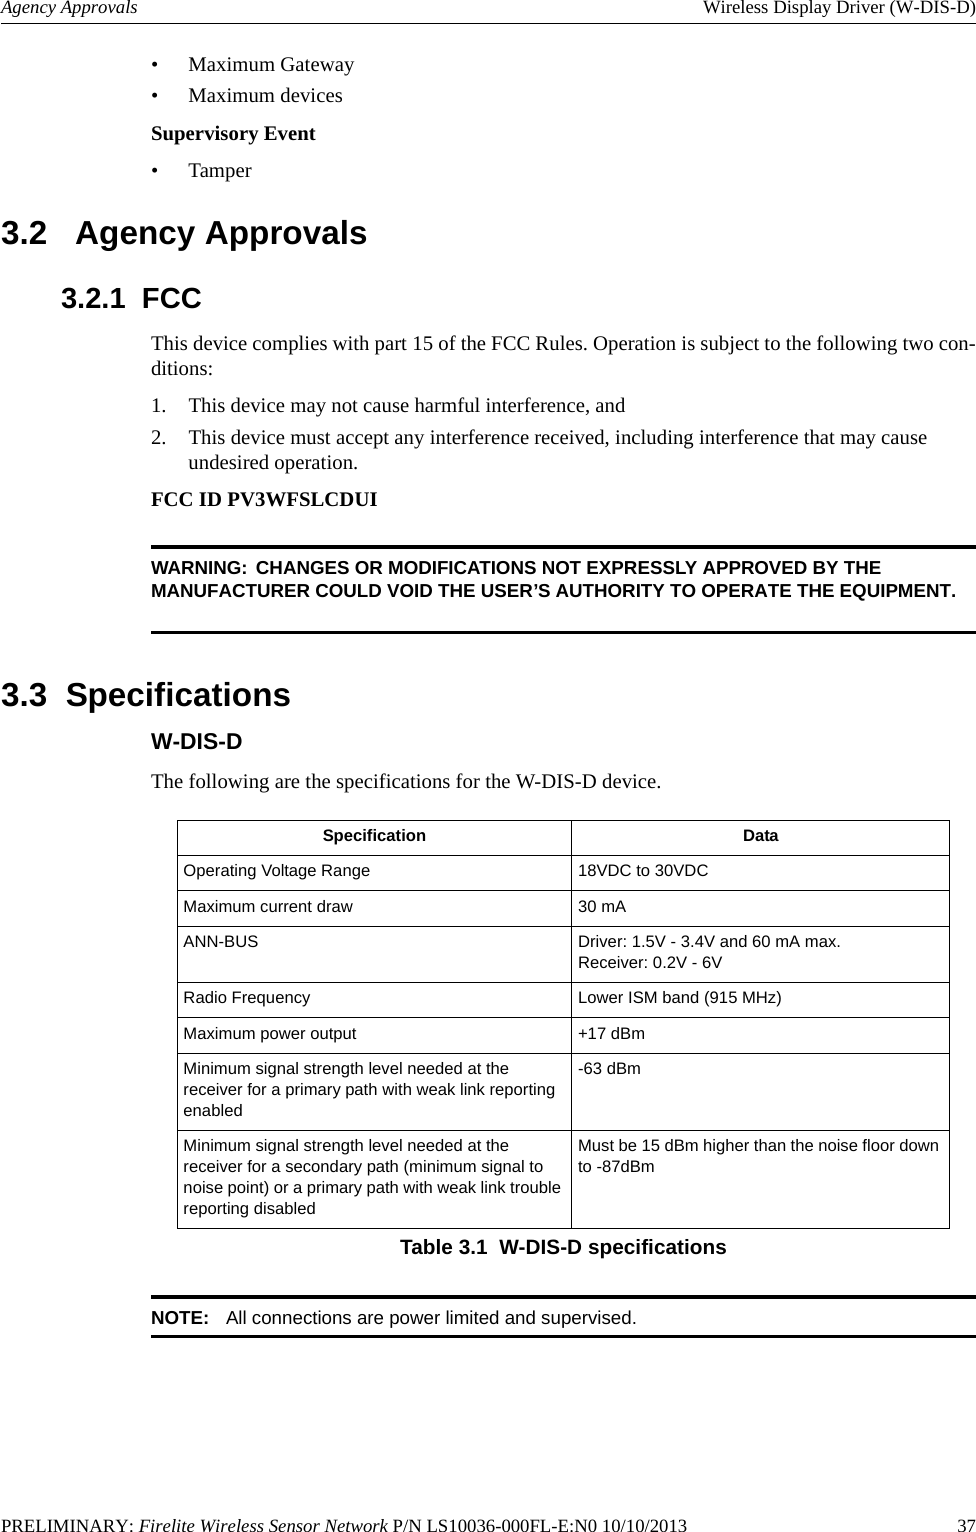 PRELIMINARY: Firelite Wireless Sensor Network P/N LS10036-000FL-E:N0 10/10/2013   37Agency Approvals Wireless Display Driver (W-DIS-D)• Maximum Gateway• Maximum devicesSupervisory Event• Tamper3.2   Agency Approvals3.2.1  FCCThis device complies with part 15 of the FCC Rules. Operation is subject to the following two con-ditions: 1. This device may not cause harmful interference, and 2. This device must accept any interference received, including interference that may cause undesired operation.FCC ID PV3WFSLCDUIWARNING: CHANGES OR MODIFICATIONS NOT EXPRESSLY APPROVED BY THE MANUFACTURER COULD VOID THE USER’S AUTHORITY TO OPERATE THE EQUIPMENT.3.3  SpecificationsW-DIS-DThe following are the specifications for the W-DIS-D device.NOTE: All connections are power limited and supervised.Specification DataOperating Voltage Range 18VDC to 30VDCMaximum current draw 30 mAANN-BUS Driver: 1.5V - 3.4V and 60 mA max.Receiver: 0.2V - 6VRadio Frequency Lower ISM band (915 MHz)Maximum power output +17 dBmMinimum signal strength level needed at the receiver for a primary path with weak link reporting enabled-63 dBmMinimum signal strength level needed at the receiver for a secondary path (minimum signal to noise point) or a primary path with weak link trouble reporting disabledMust be 15 dBm higher than the noise floor down to -87dBmTable 3.1  W-DIS-D specifications